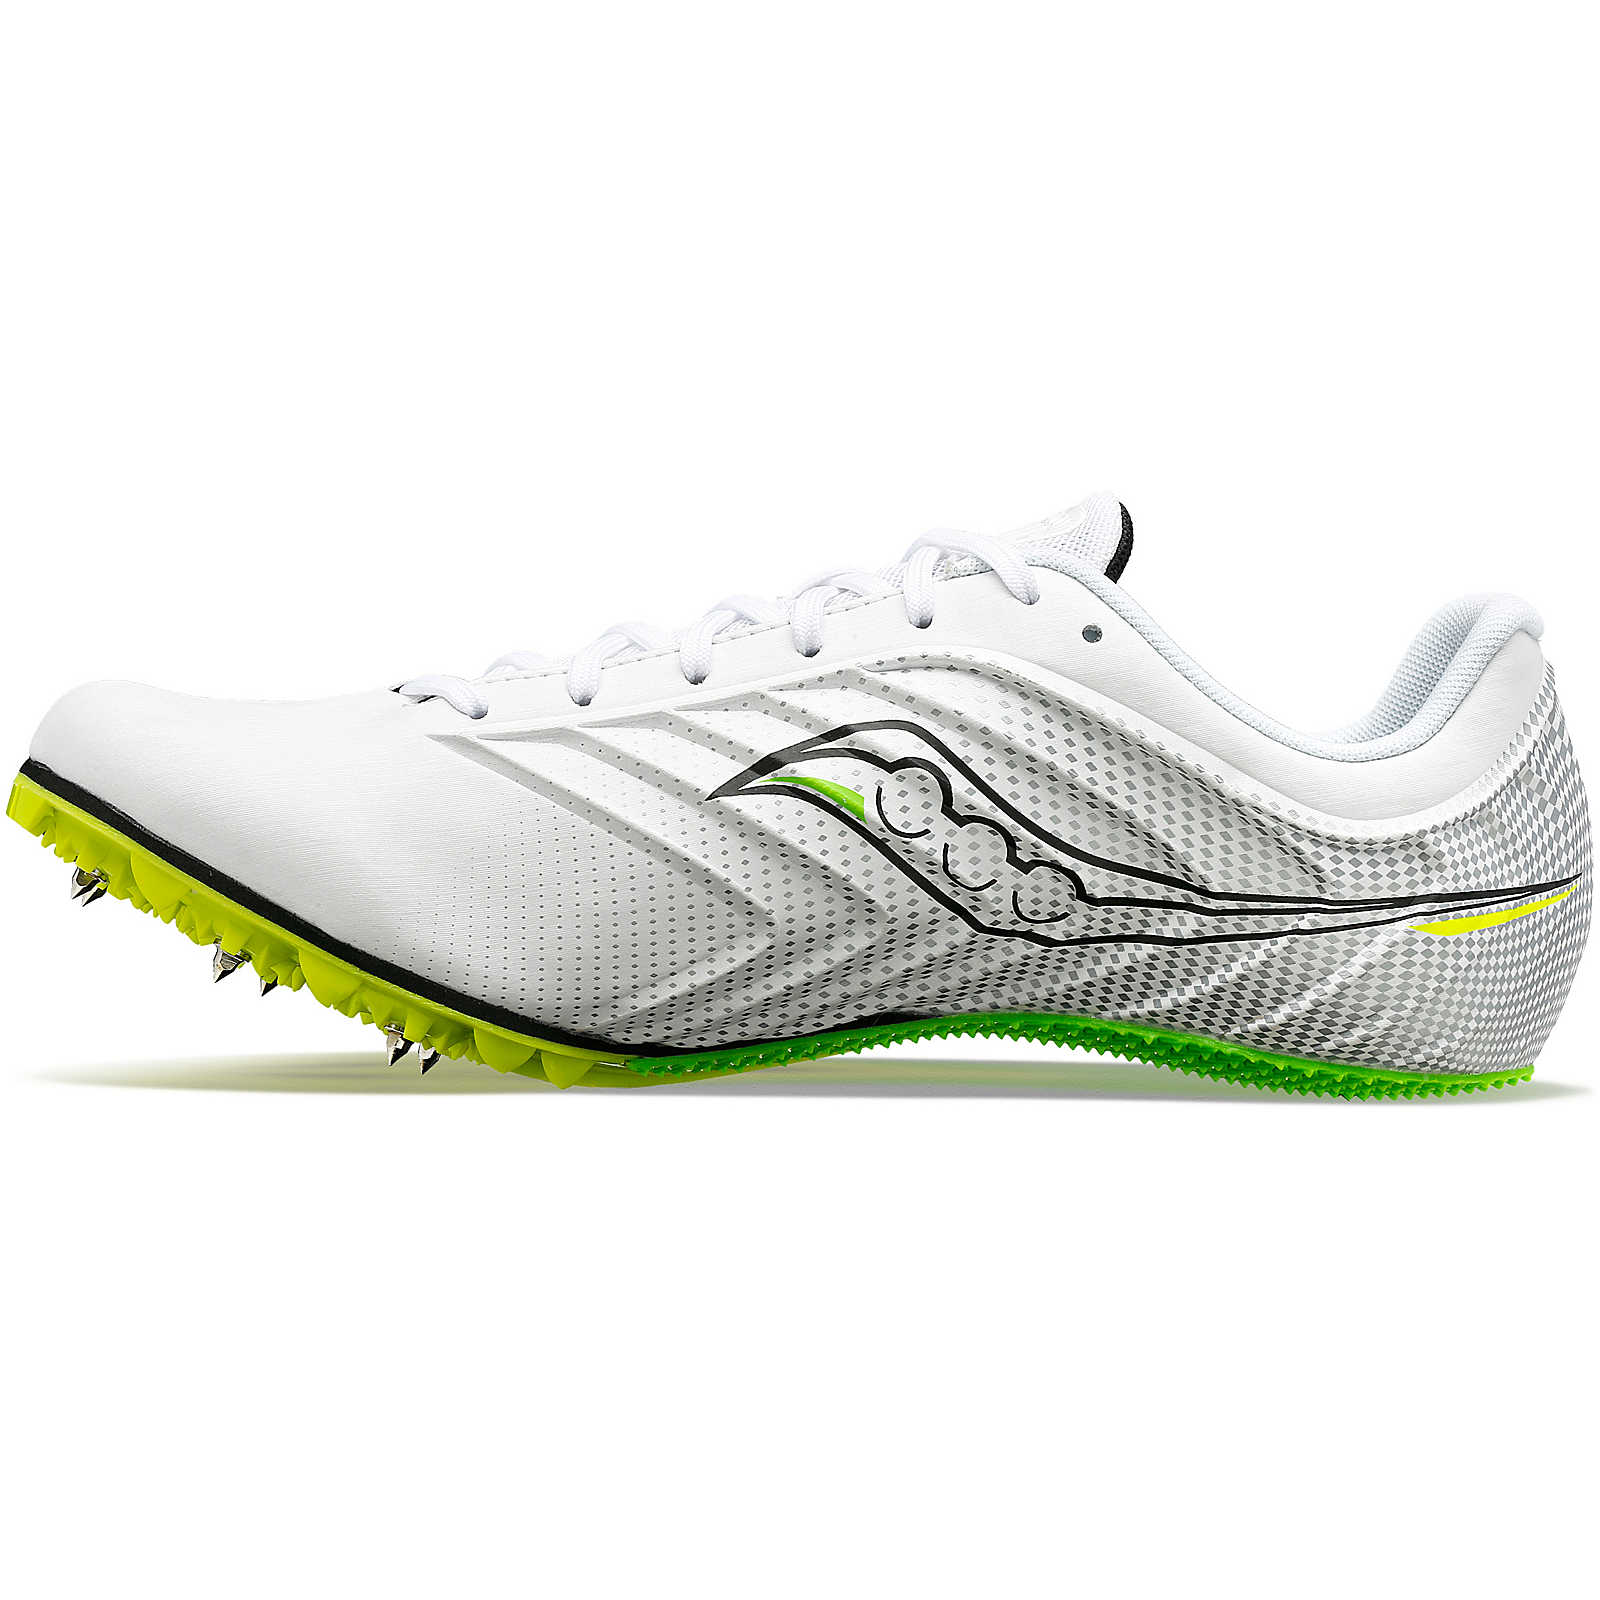 UNISEX SPITFIRE 5 - 75 WHITE/SLIME | Performance Running Outfitters